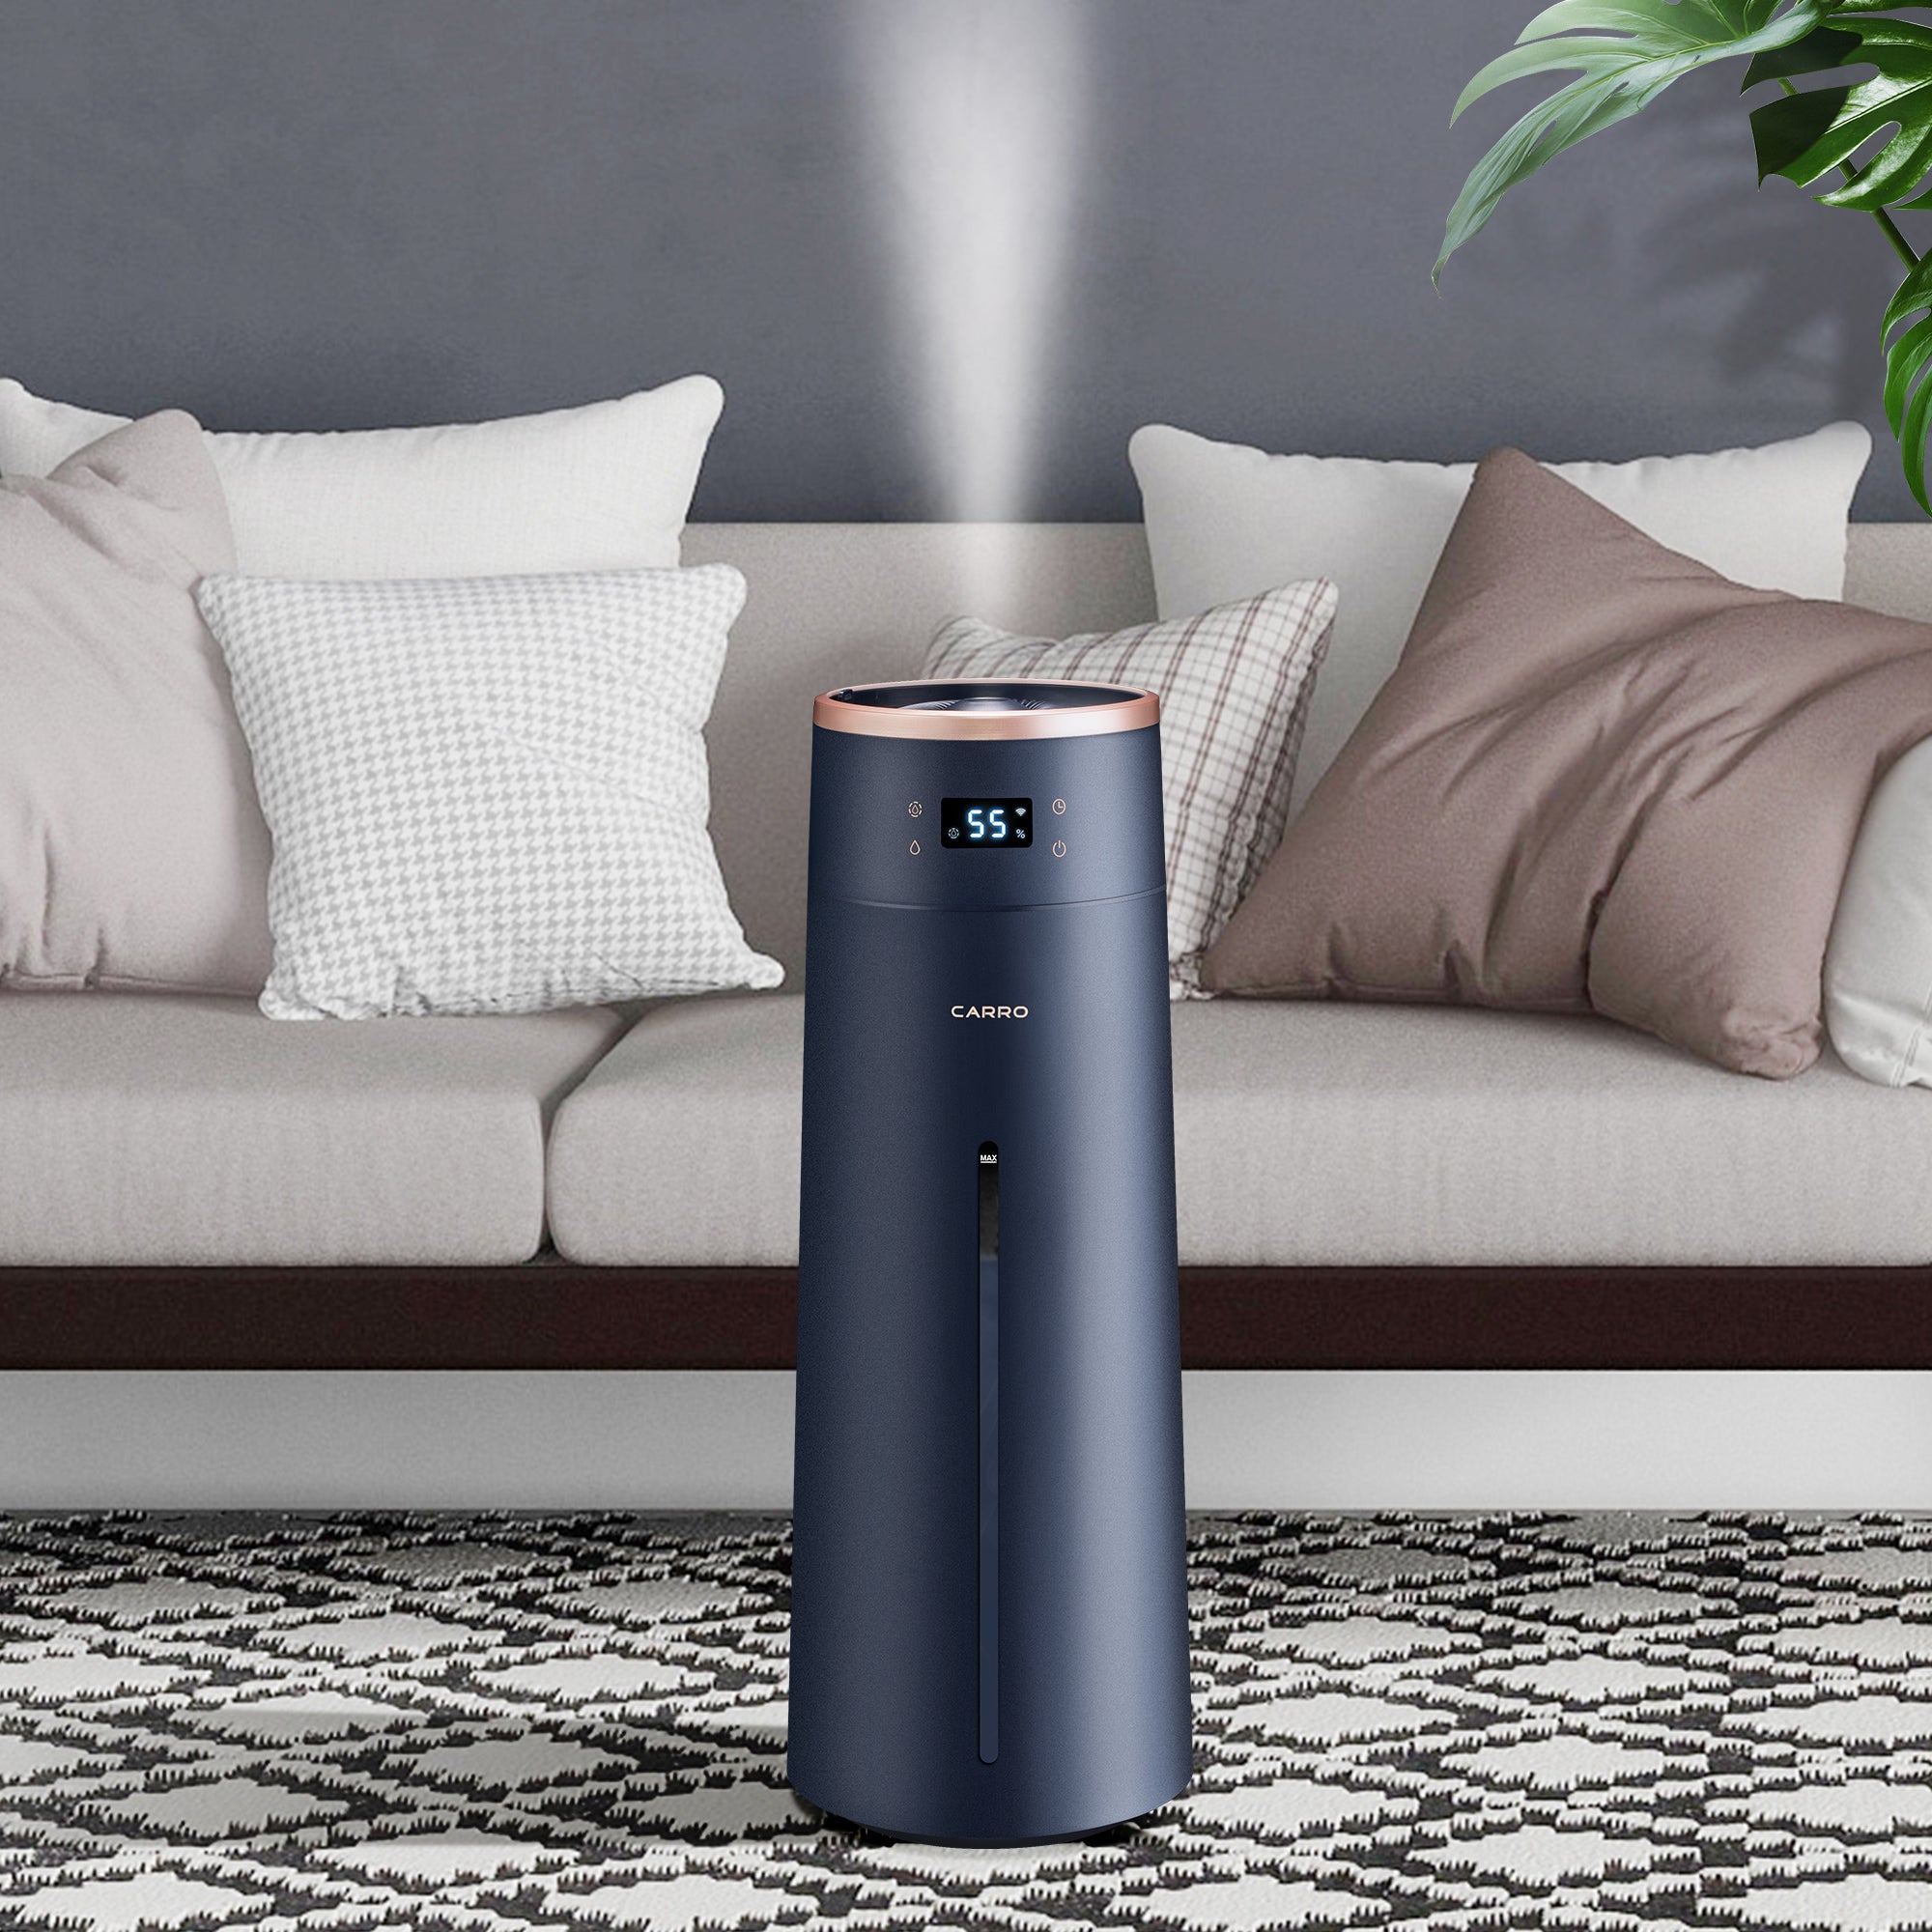 The humidifier features Wi-Fi apps, Siri Shortcut and Voice control technology (compatible with Amazon Alexa and Google Home Assistant ) to set humidity preferences.Carro humidifier helps create better interior environment with more relief and comfort ,for those suffering from colds, allergies and dry skin. #color_Black